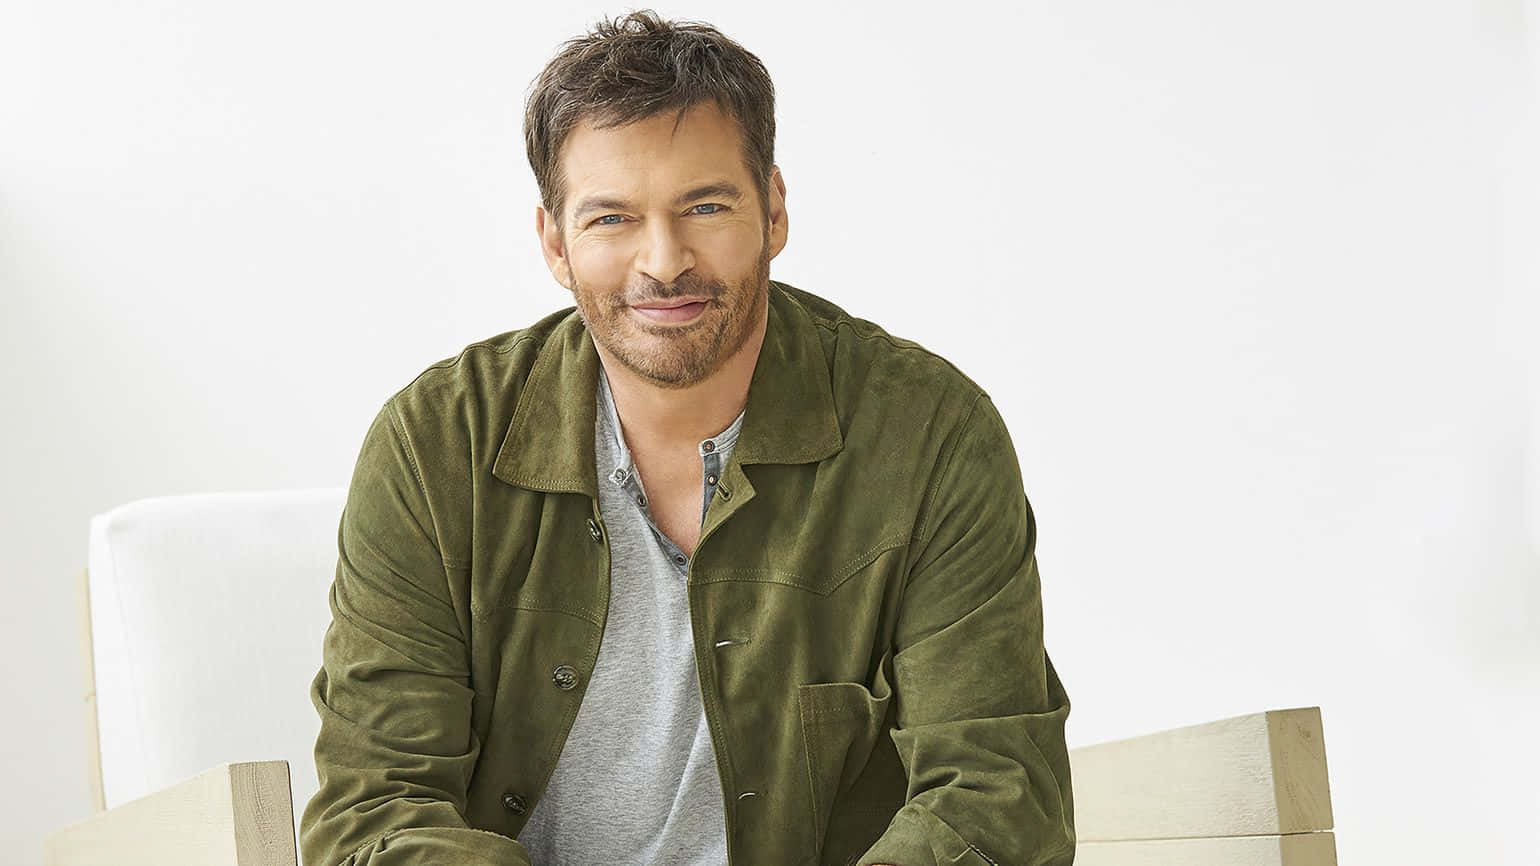 Harry Connick Jr. performing on stage Wallpaper